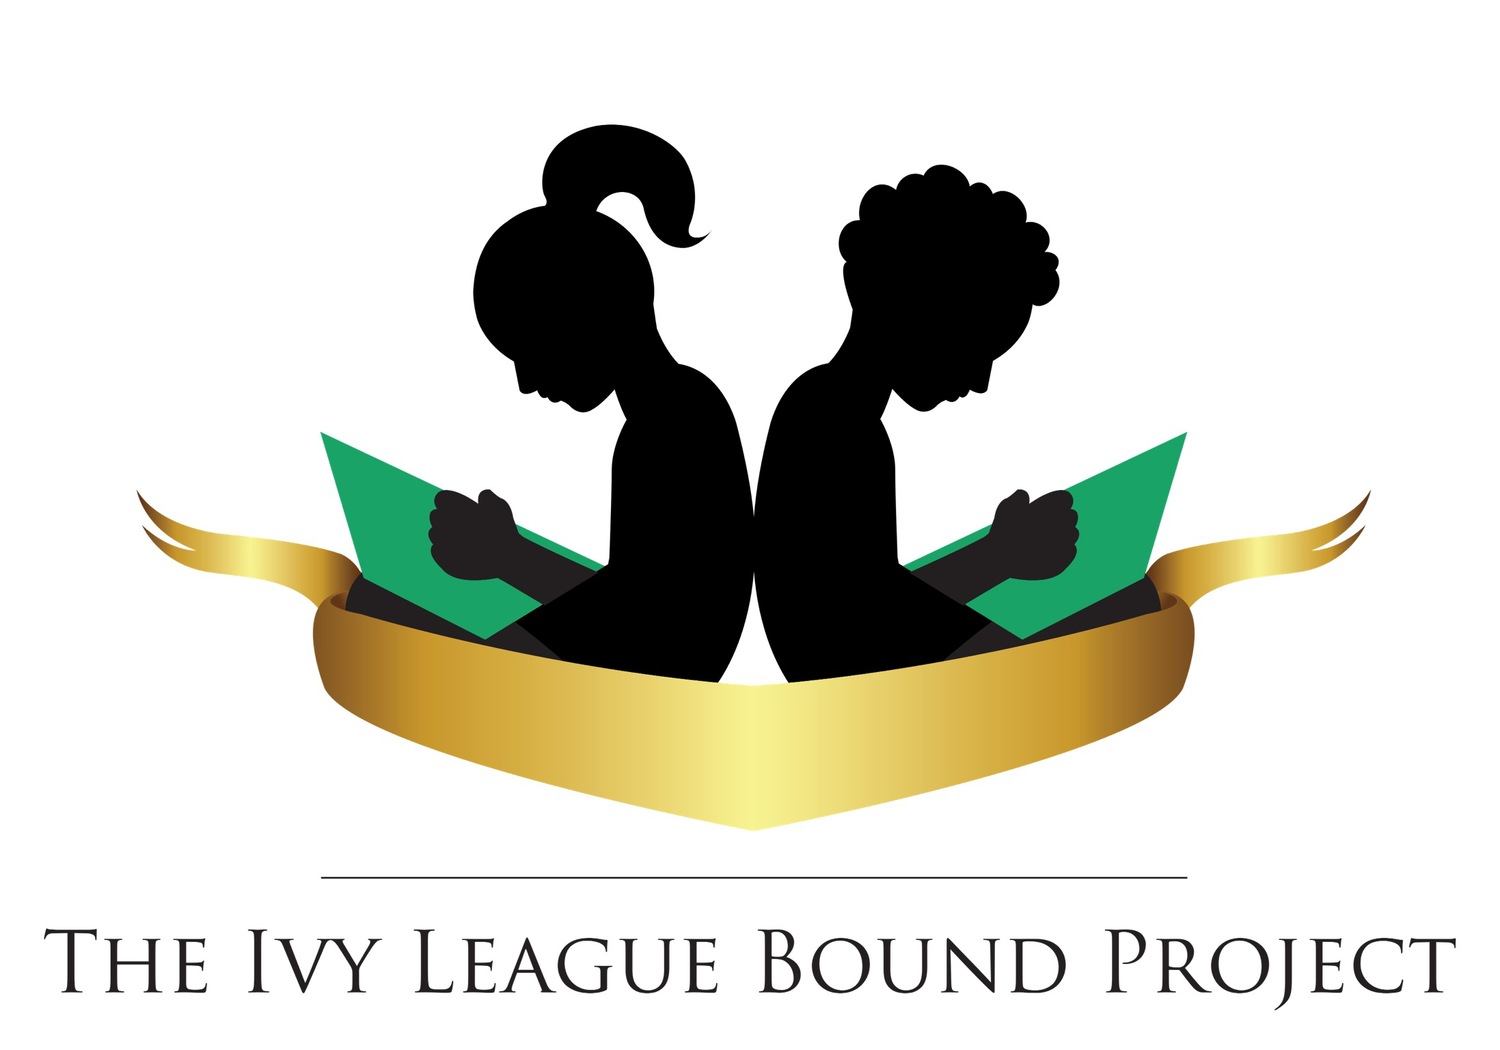 The Ivy League Bound Project, Inc